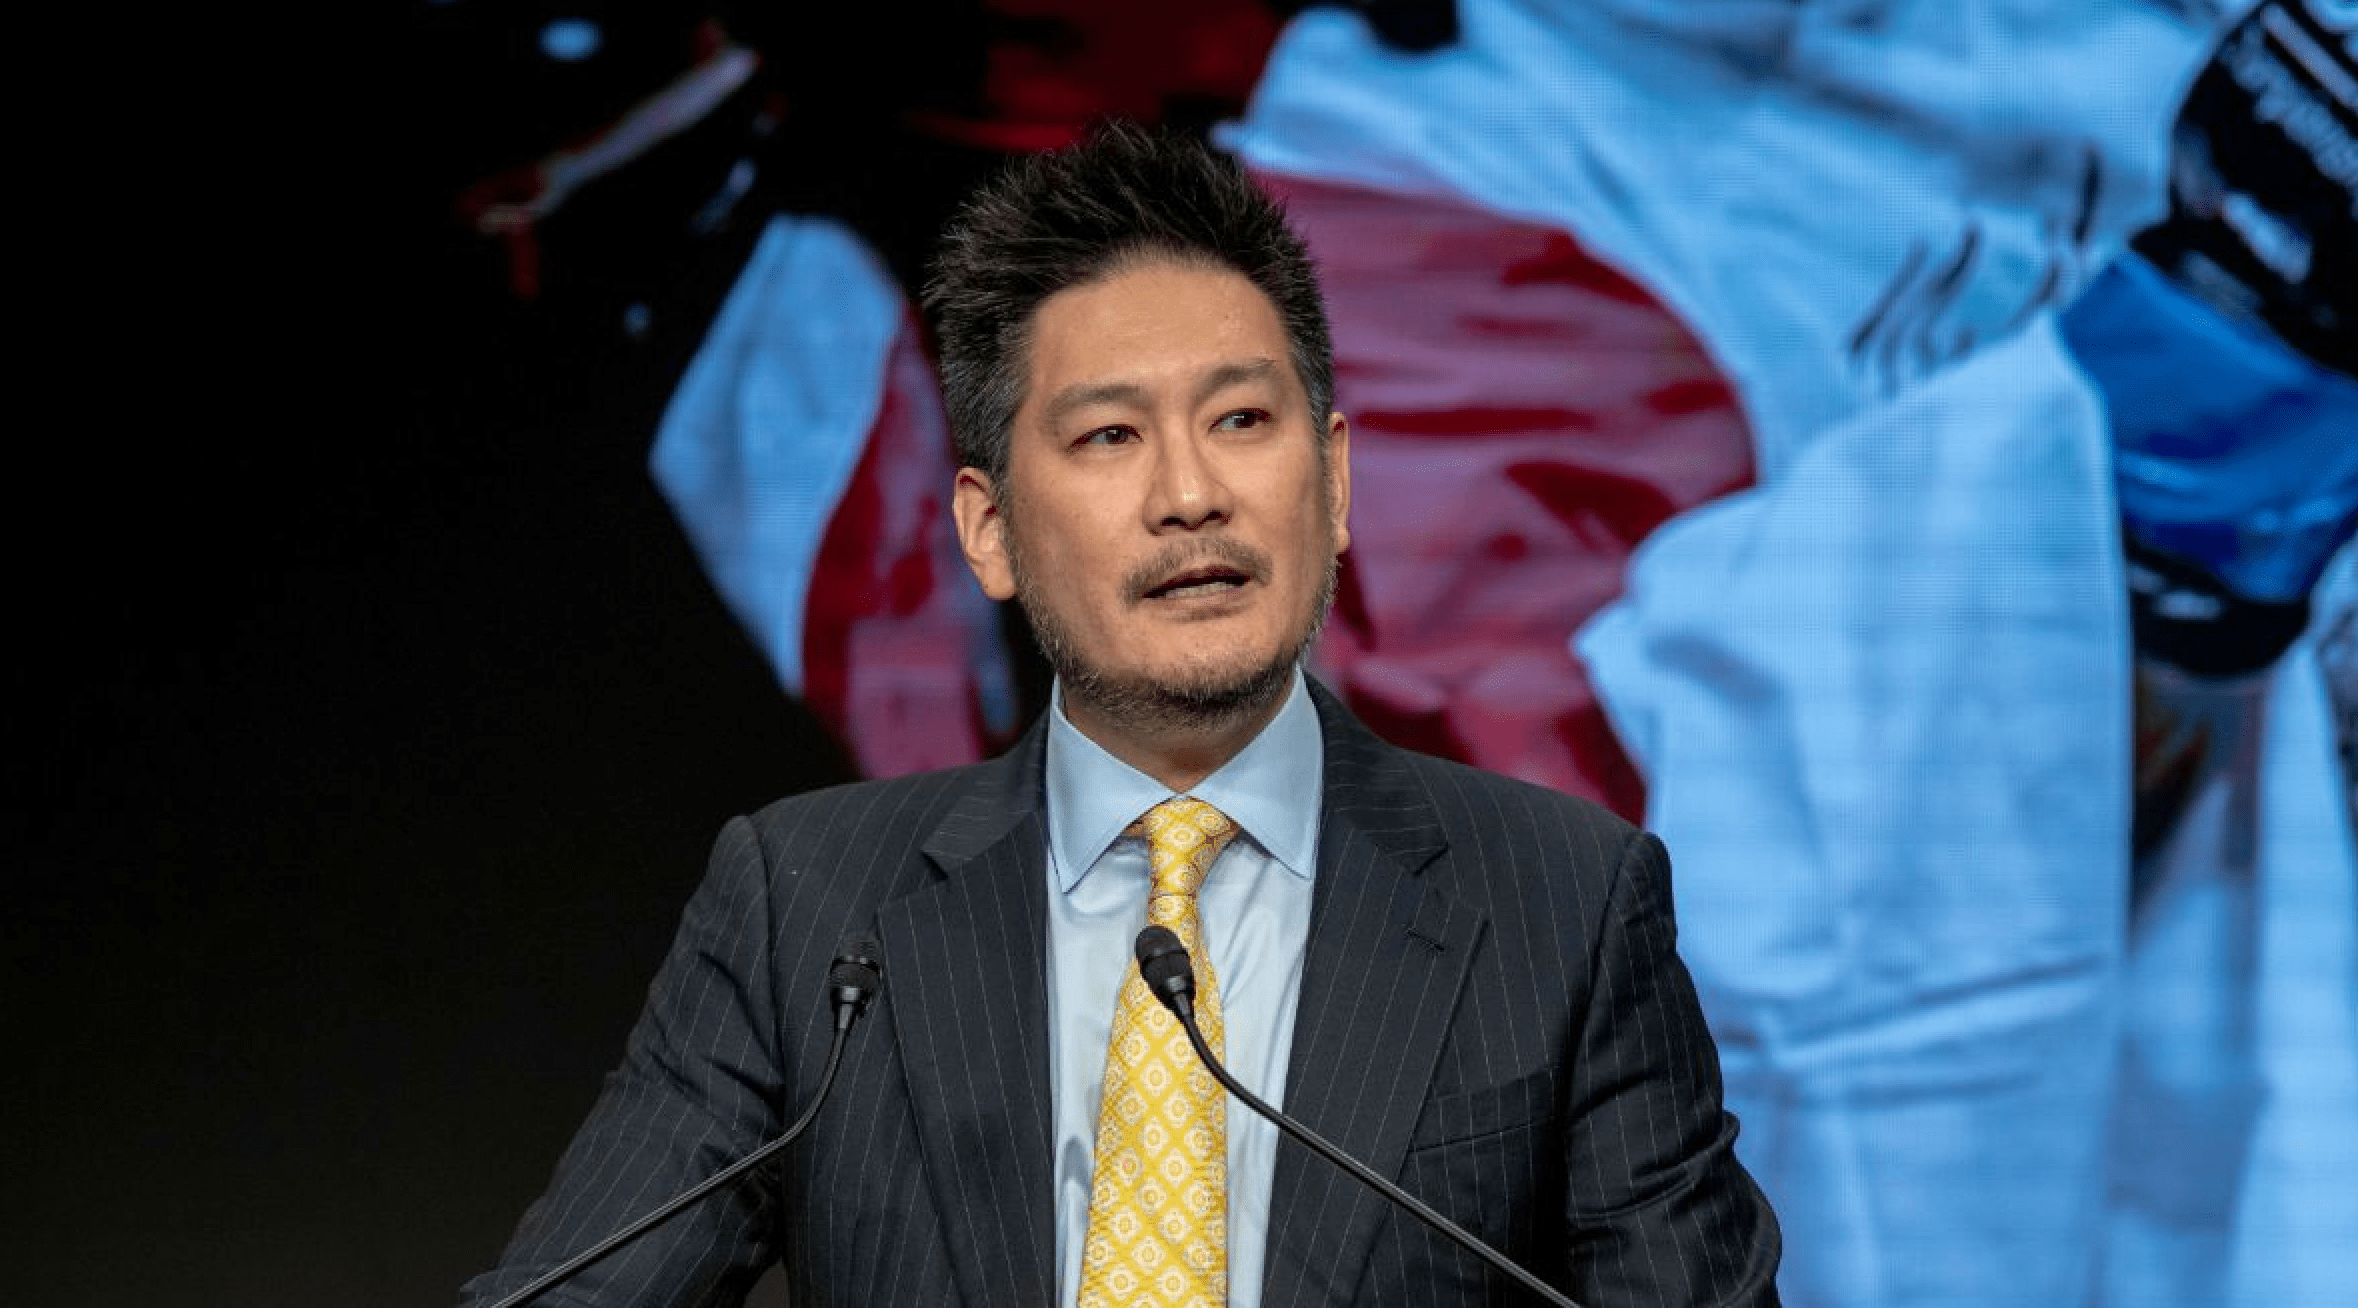 Chatri Sityodtong Tells His Story Of ‘Suffering, Sacrifice And Success’